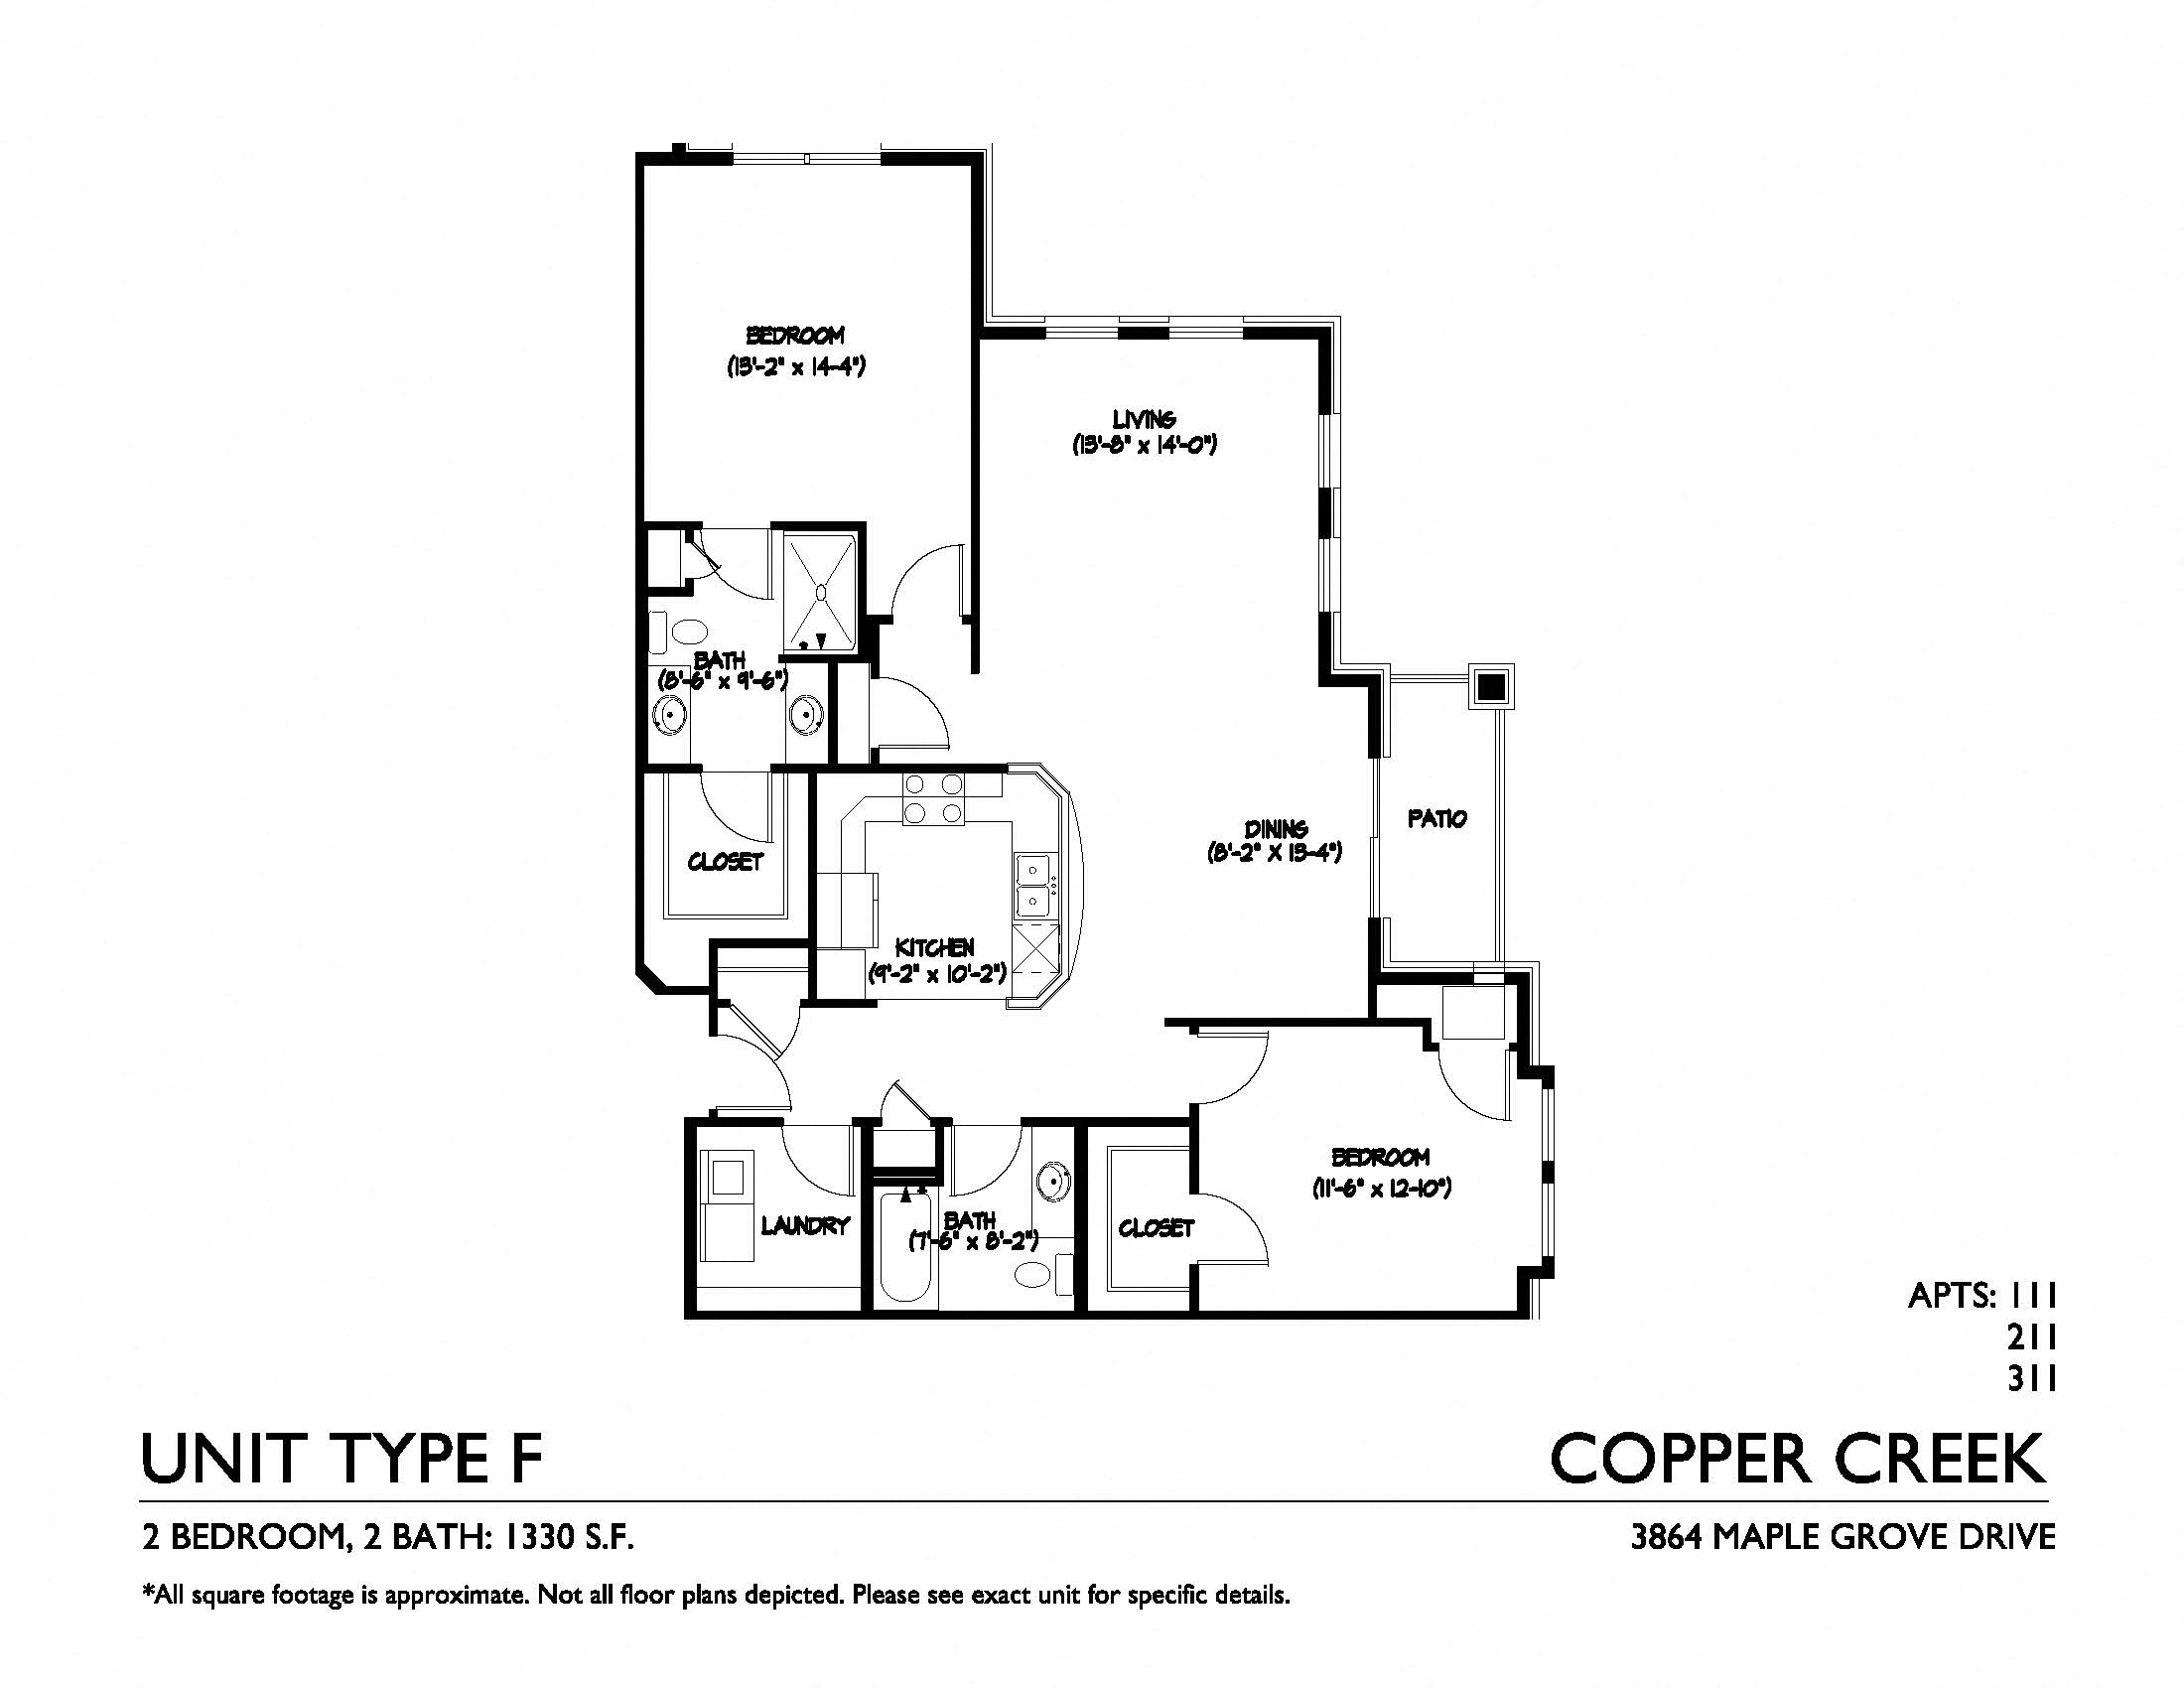 Floor Plans of Copper Creek in Madison, WI